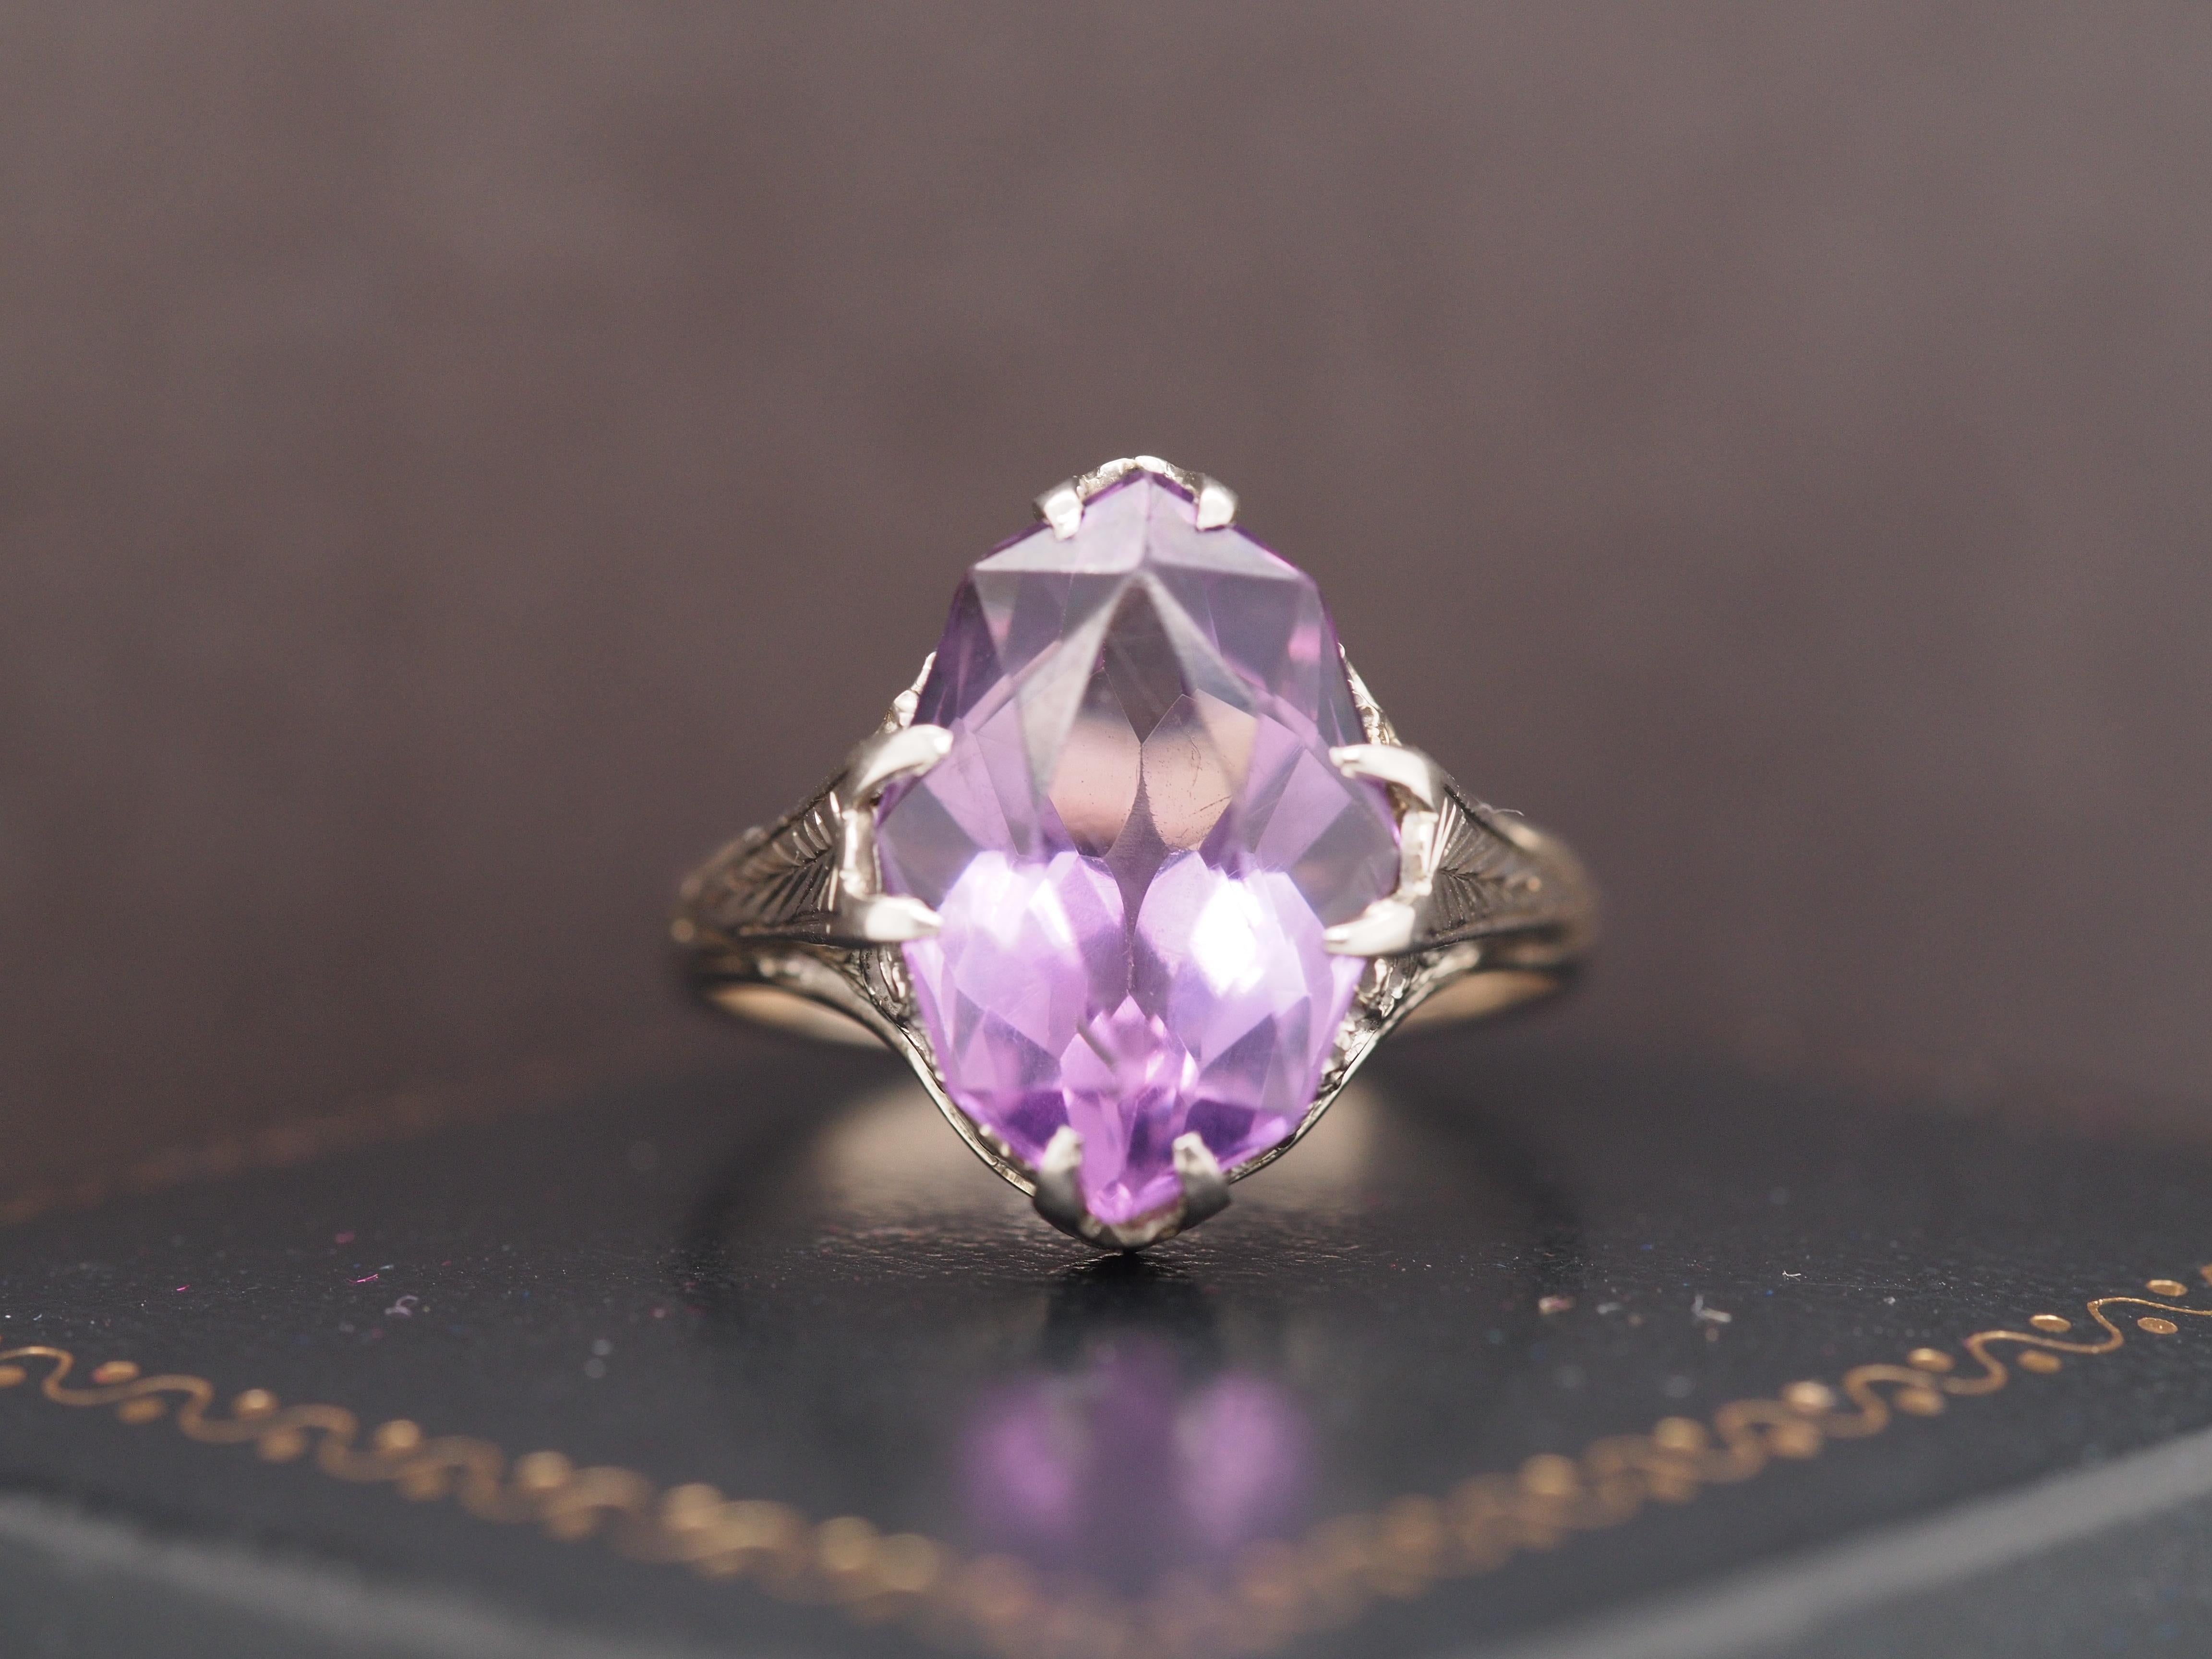 Item Details:
Ring Size: 7.5
Metal Type: 14K White Gold [Hallmarked, and Tested]
Weight: 4.2 grams
Center Details
Center Amethyst: 3.00ct, Purple, Amethyst,Marquise Shape, Natural
Band Width: 2mm
Condition: Excellent
Price: 800
This ring can be